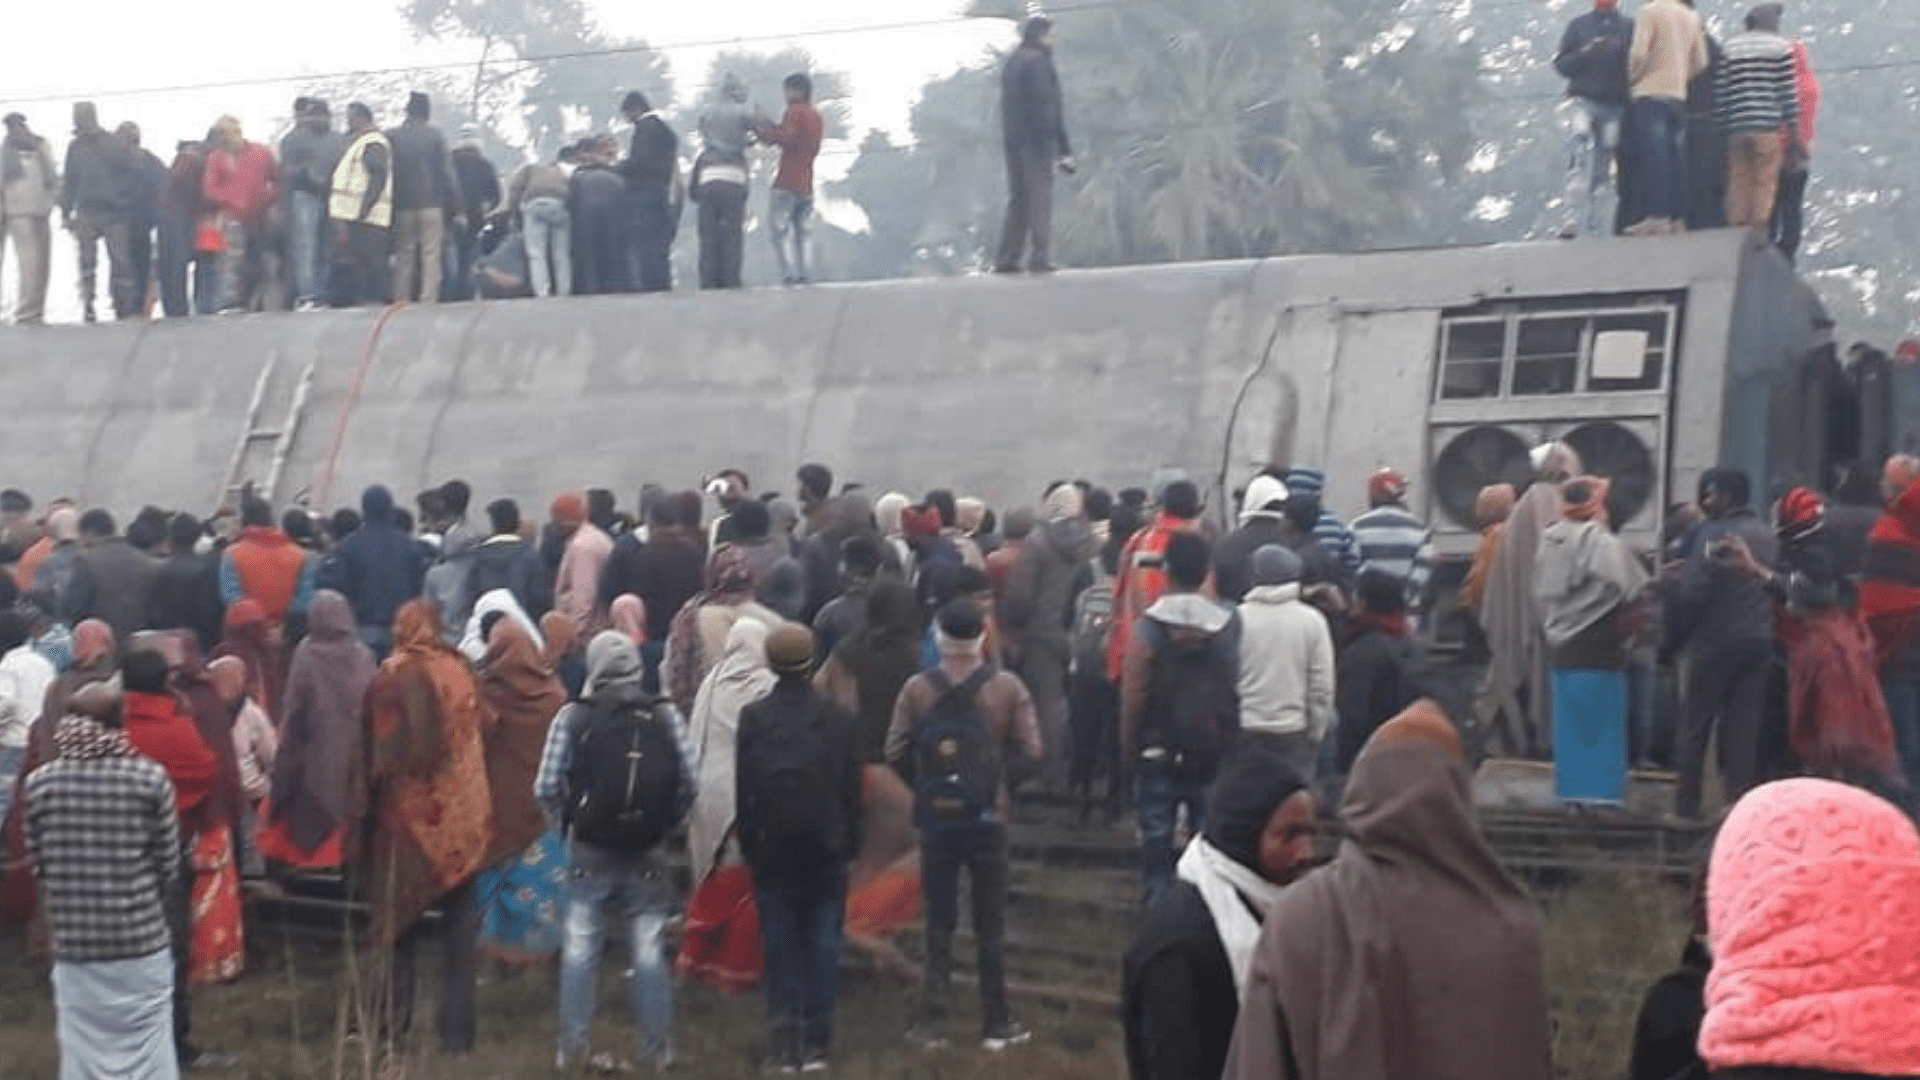 Nine coaches of the Delhi-bound Seemanchal Express derailed in Vaishali district of Bihar on Sunday morning.